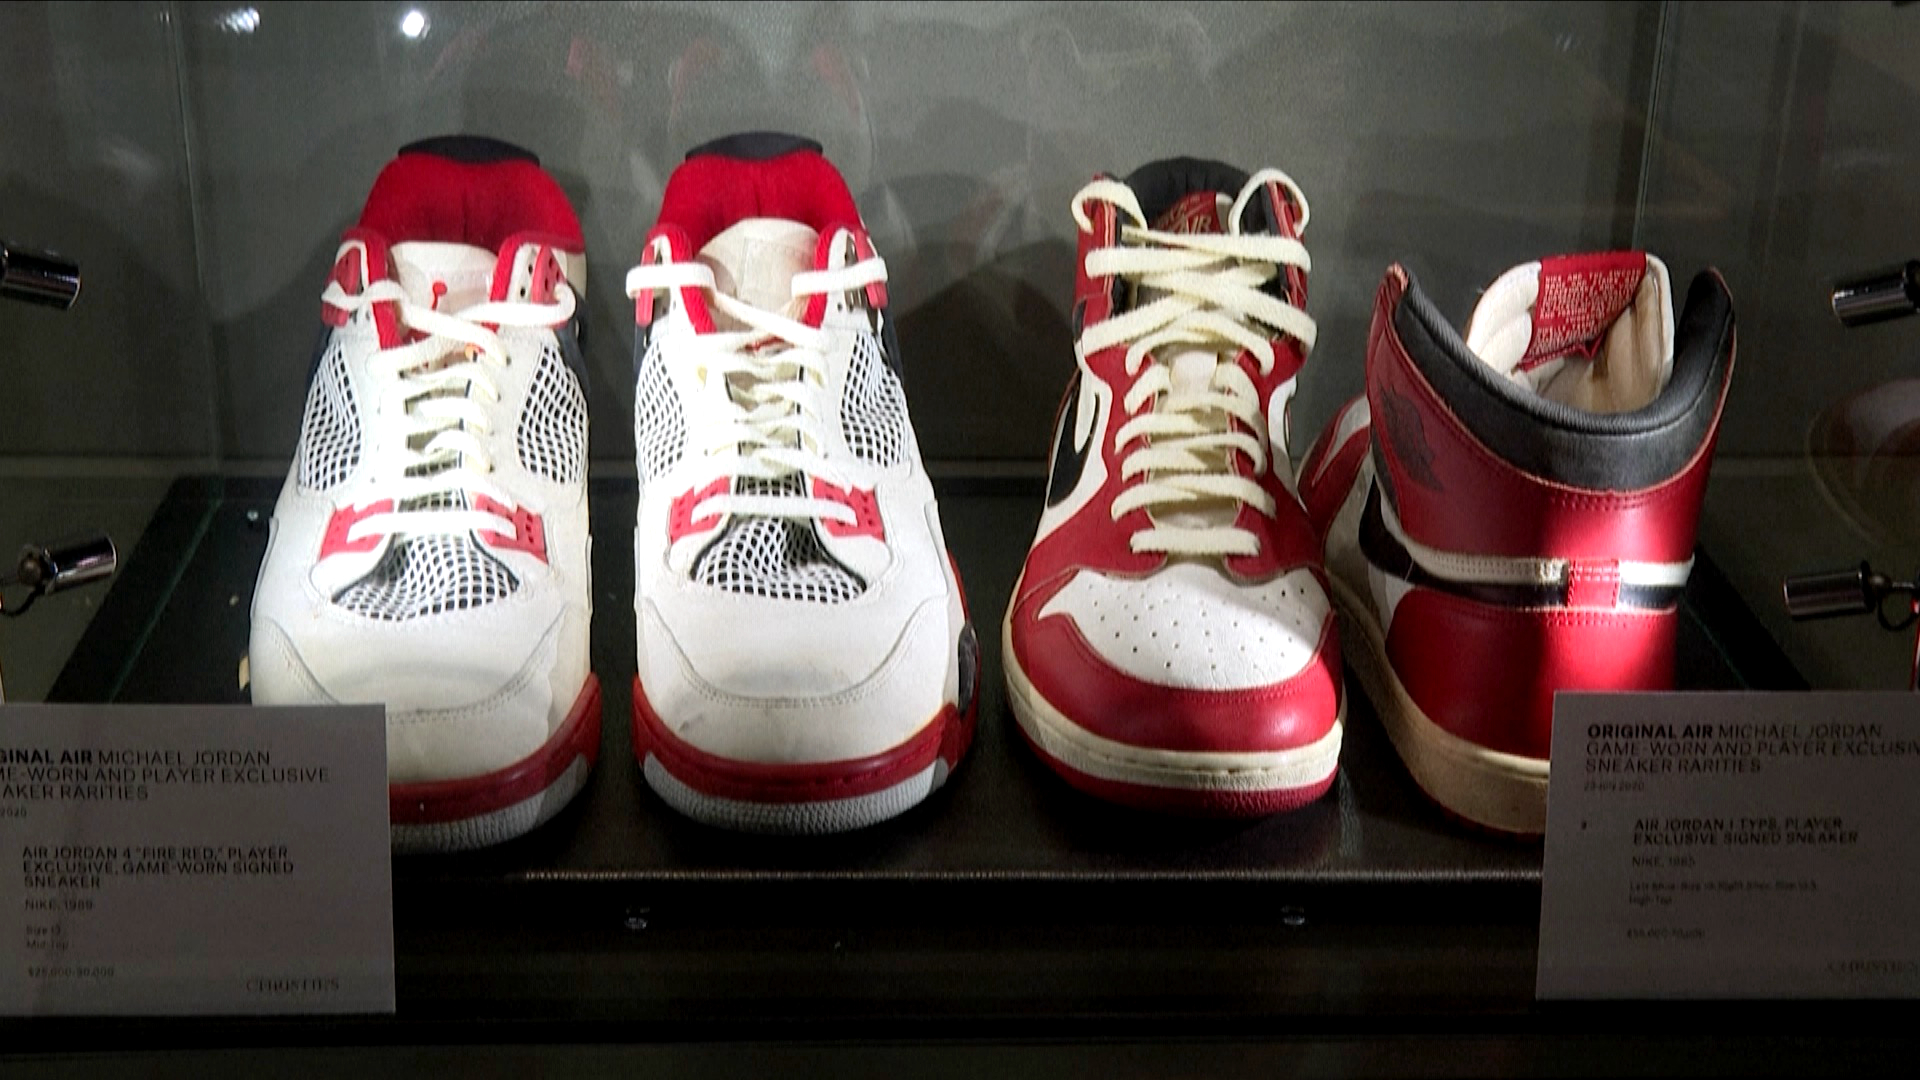 Michael Jordan's 1984 game-worn shoes to be auctioned